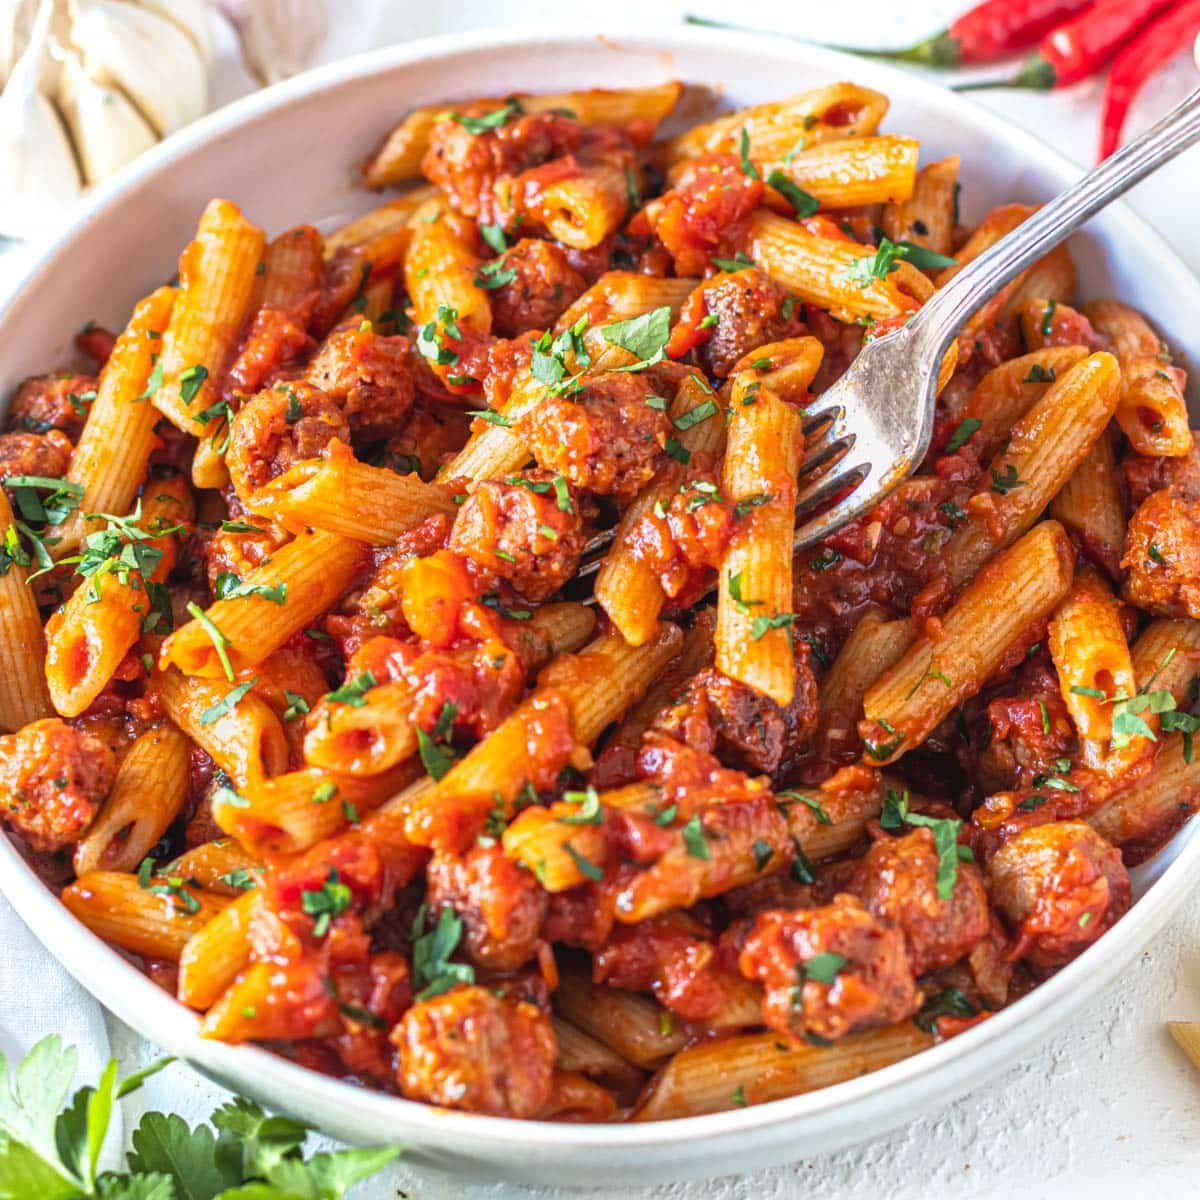 Penne with arrabbiata sauce and a silver fork in the pasta